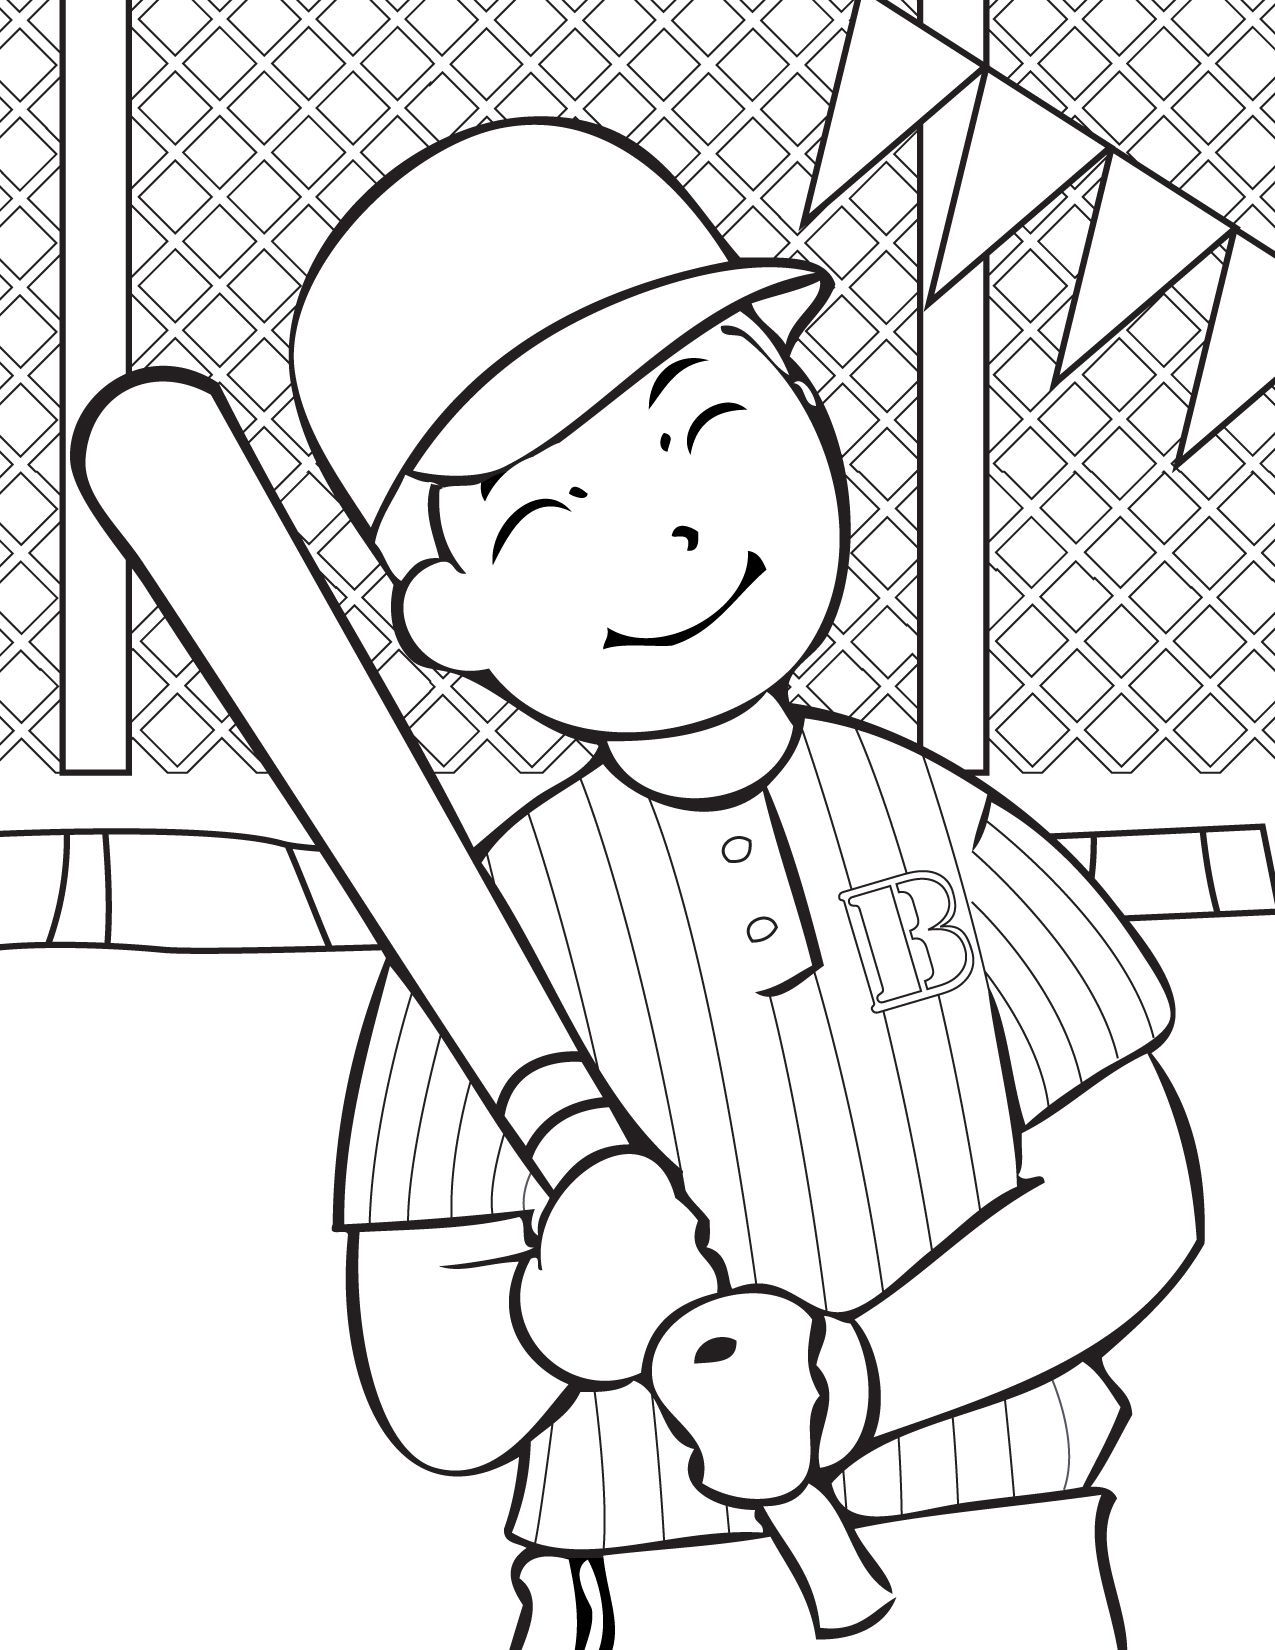 Smiling Baseball Player Coloring Page - Free Printable Coloring Pages for  Kids